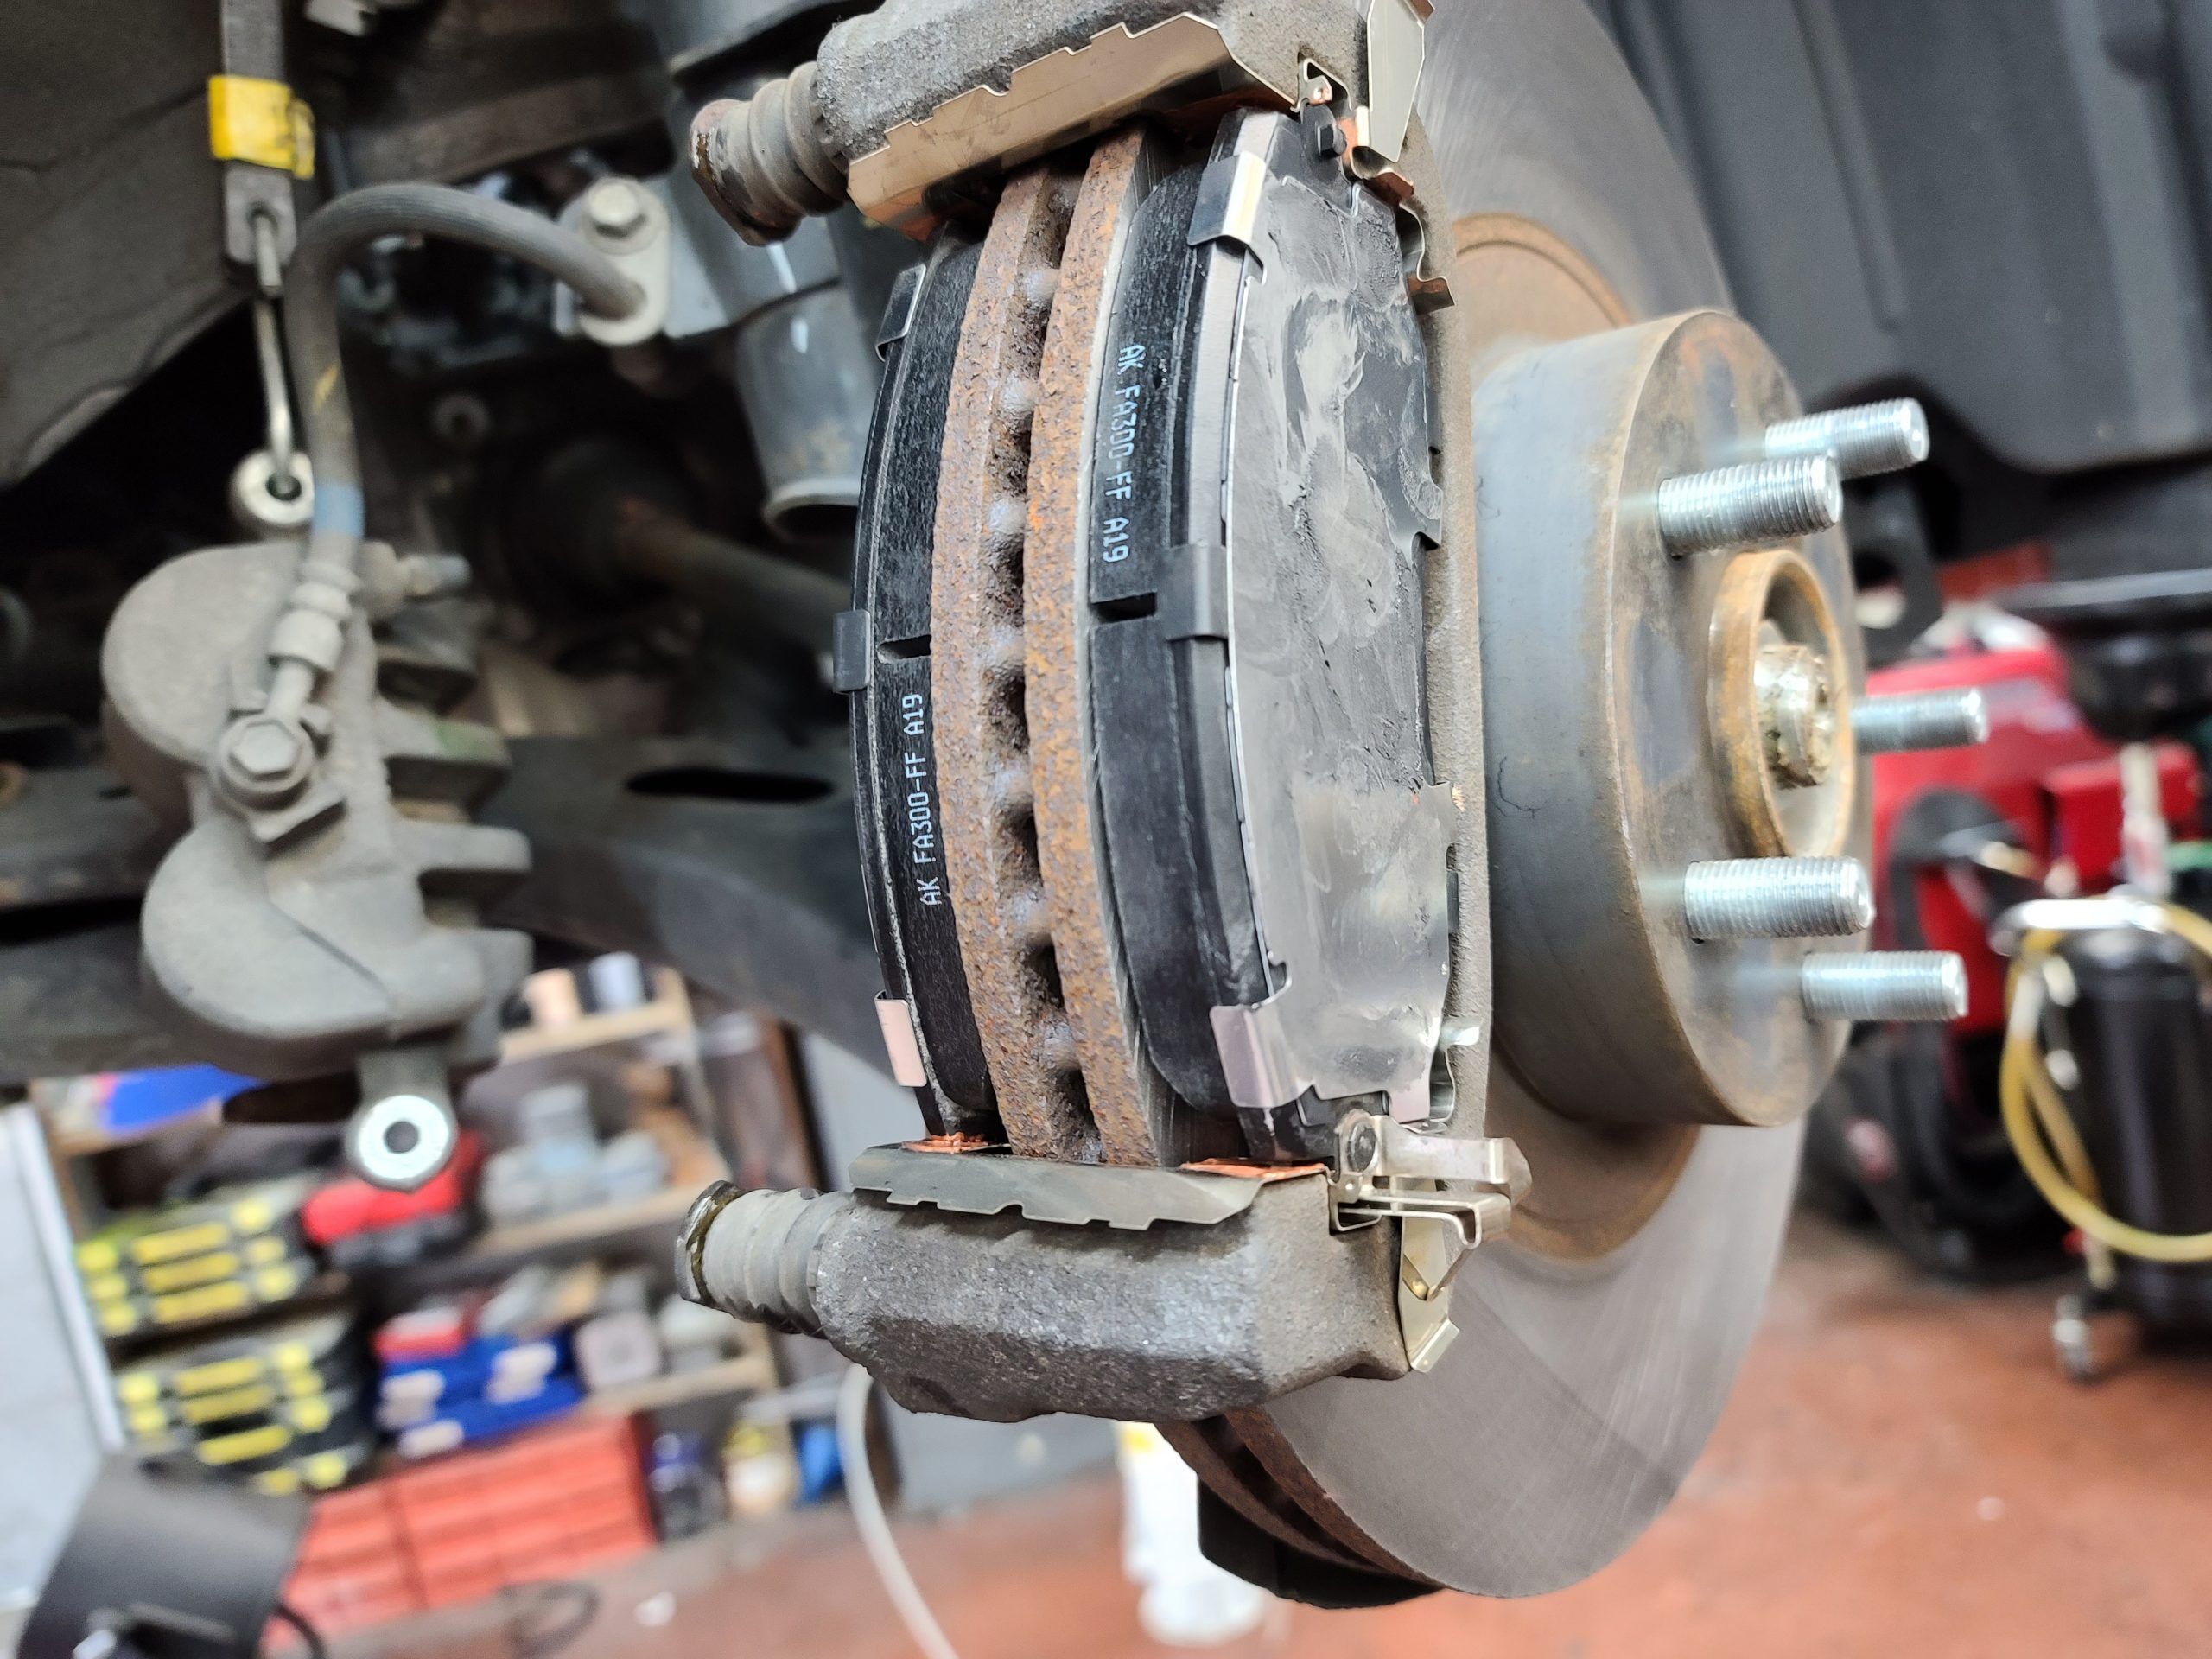 A half-complete brake repair. The caliper is suspended with a bungie to prevent strain on the brake hose. Art's Automotive auto repair shop in Berkeley sits in the background.